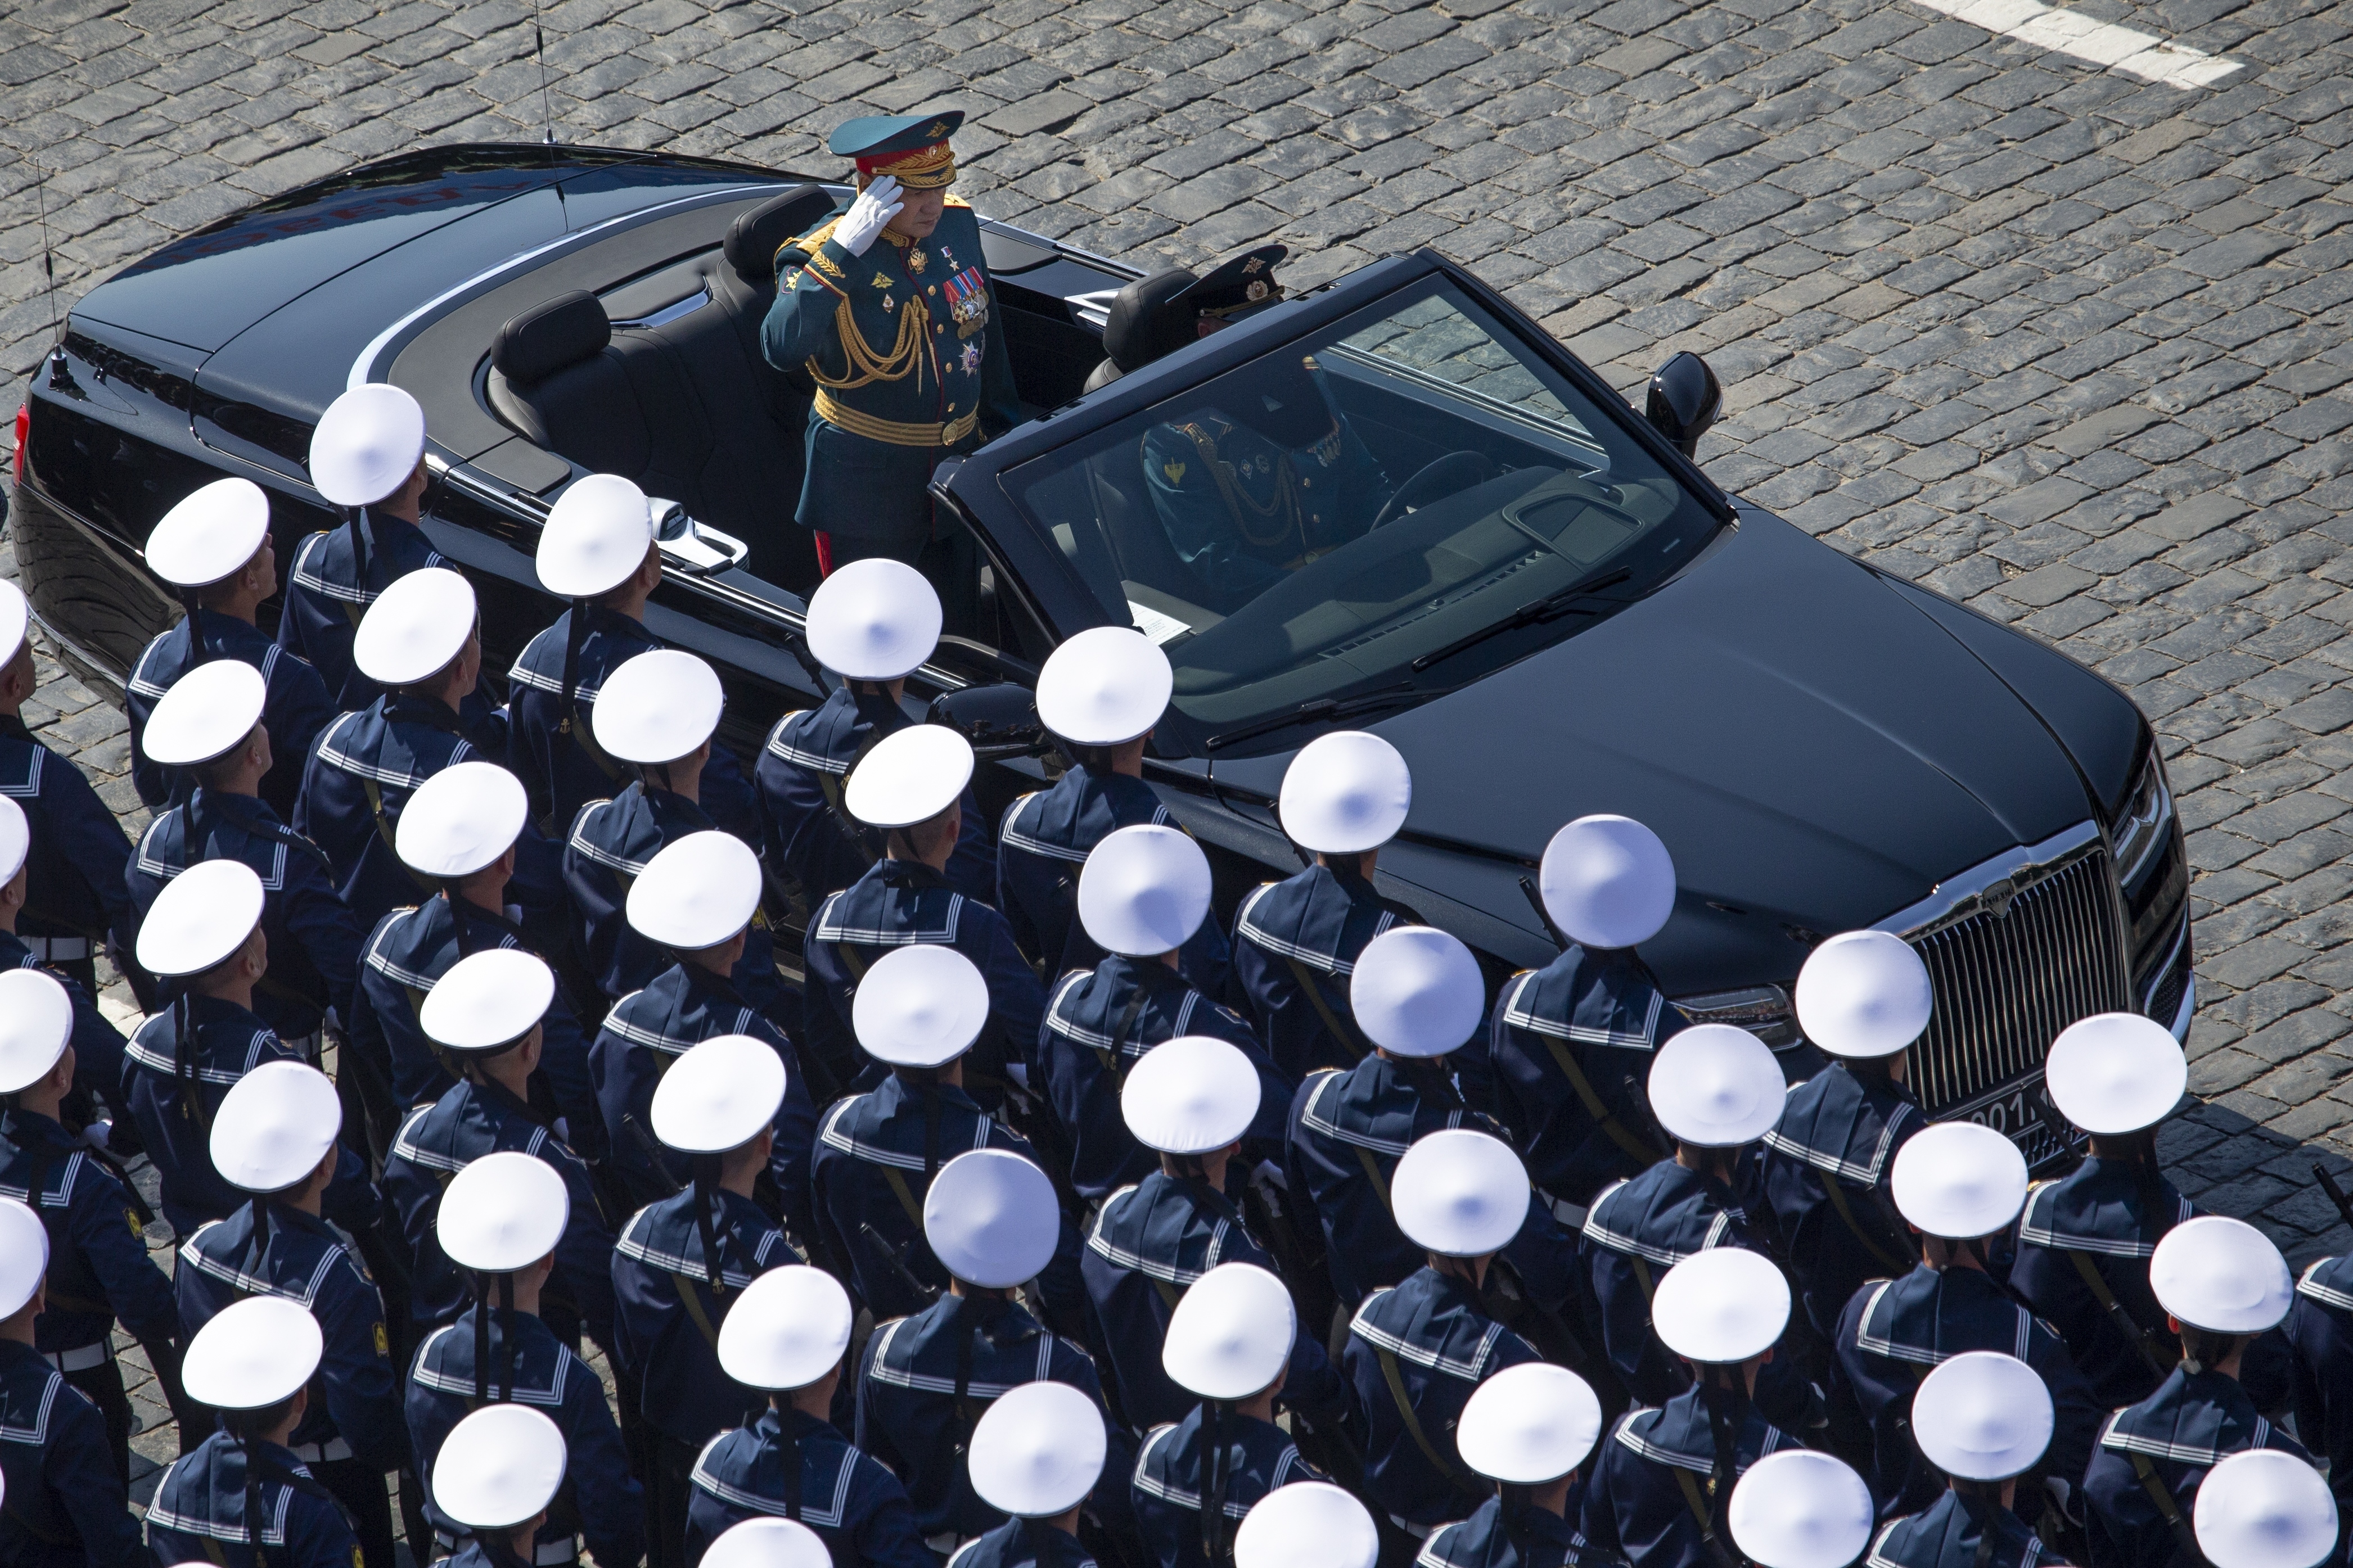 Russian Defense Minister Sergei Shoigu, top, salutes to soldiers as he is driven along Red Square during a rehearsal for the Victory Day military parade in Moscow, Russia, Tuesday, May 7, 2019 . The parade will take place at Moscow's Red Square on May 9 to celebrate 74 years of the victory in WWII. (AP Photo/Alexander Zemlianichenko, Pool)